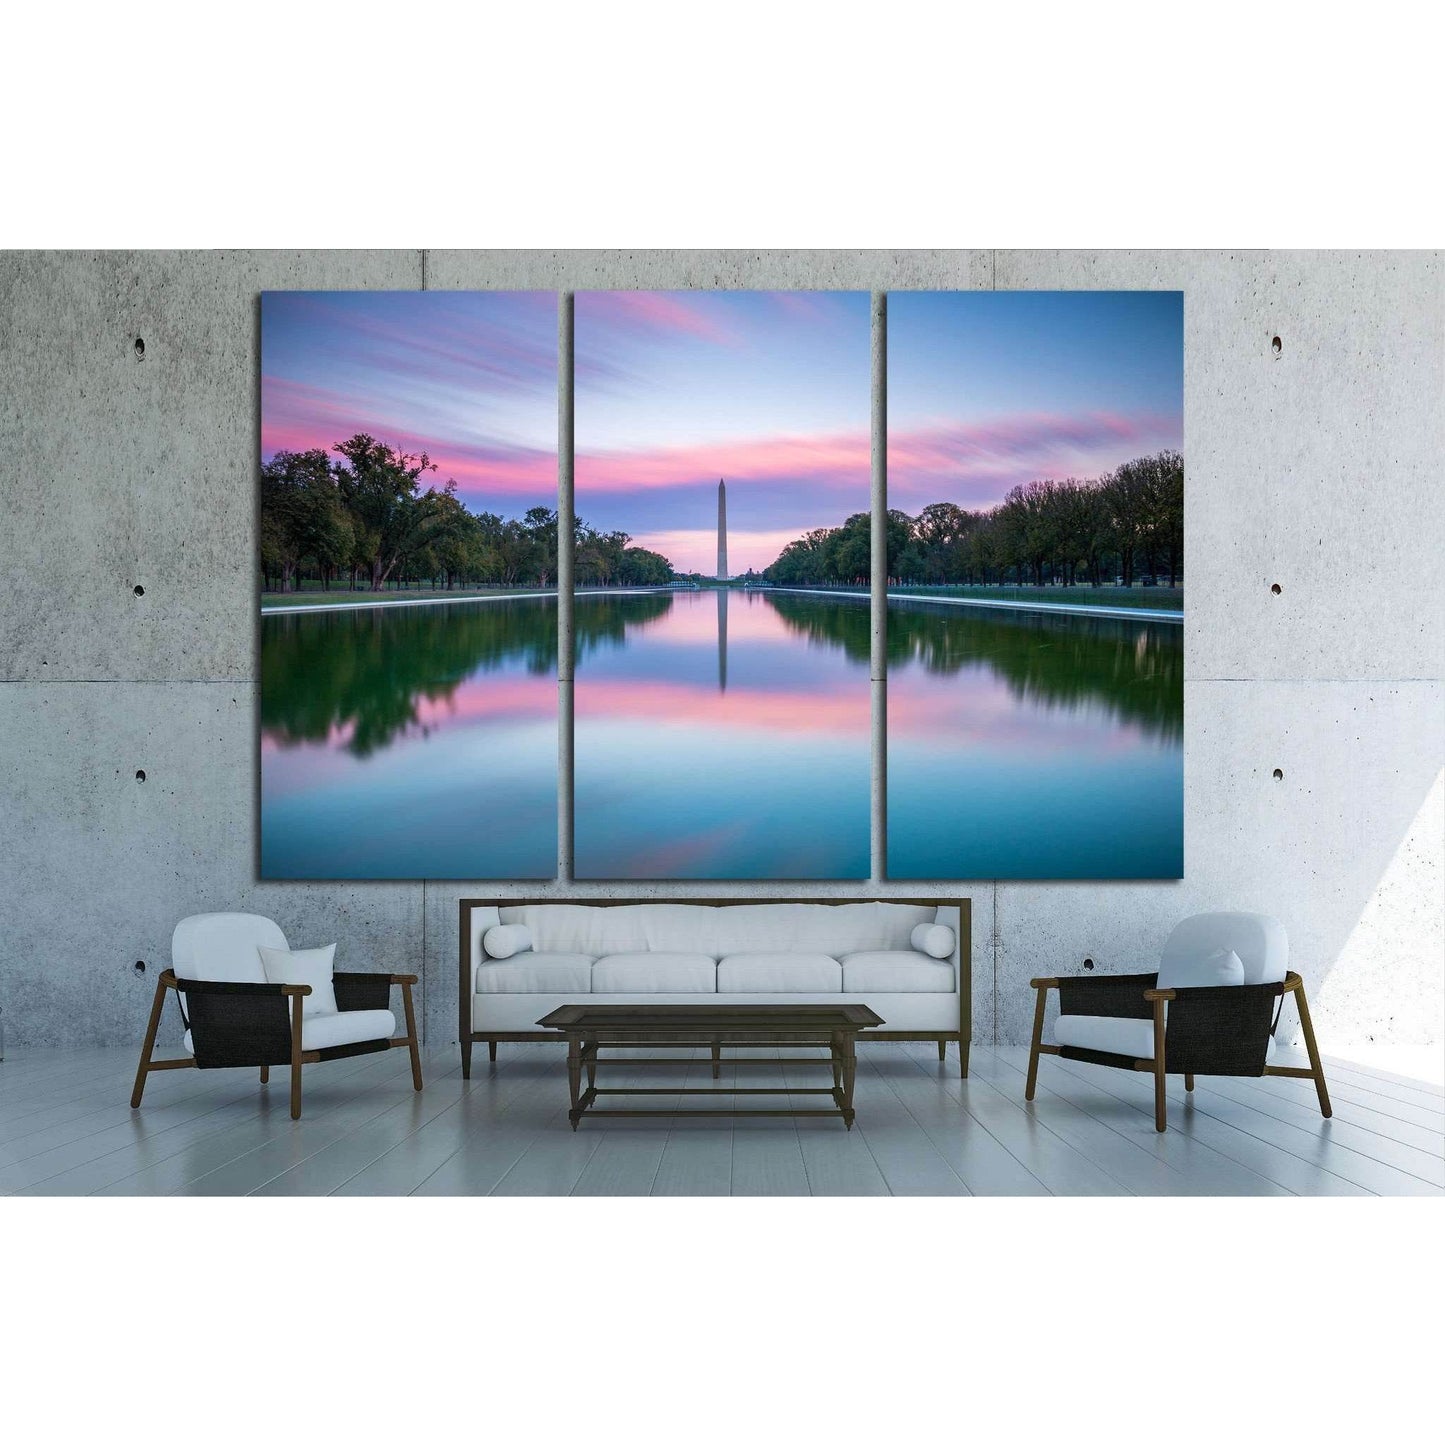 Washington Monument and Lincoln Memorial at Sunset Inspirational Office ArtThis canvas print captures a serene sunrise or sunset over the Reflecting Pool with a view towards the Washington Monument in Washington, D.C. The tranquil waters mirror the vibran